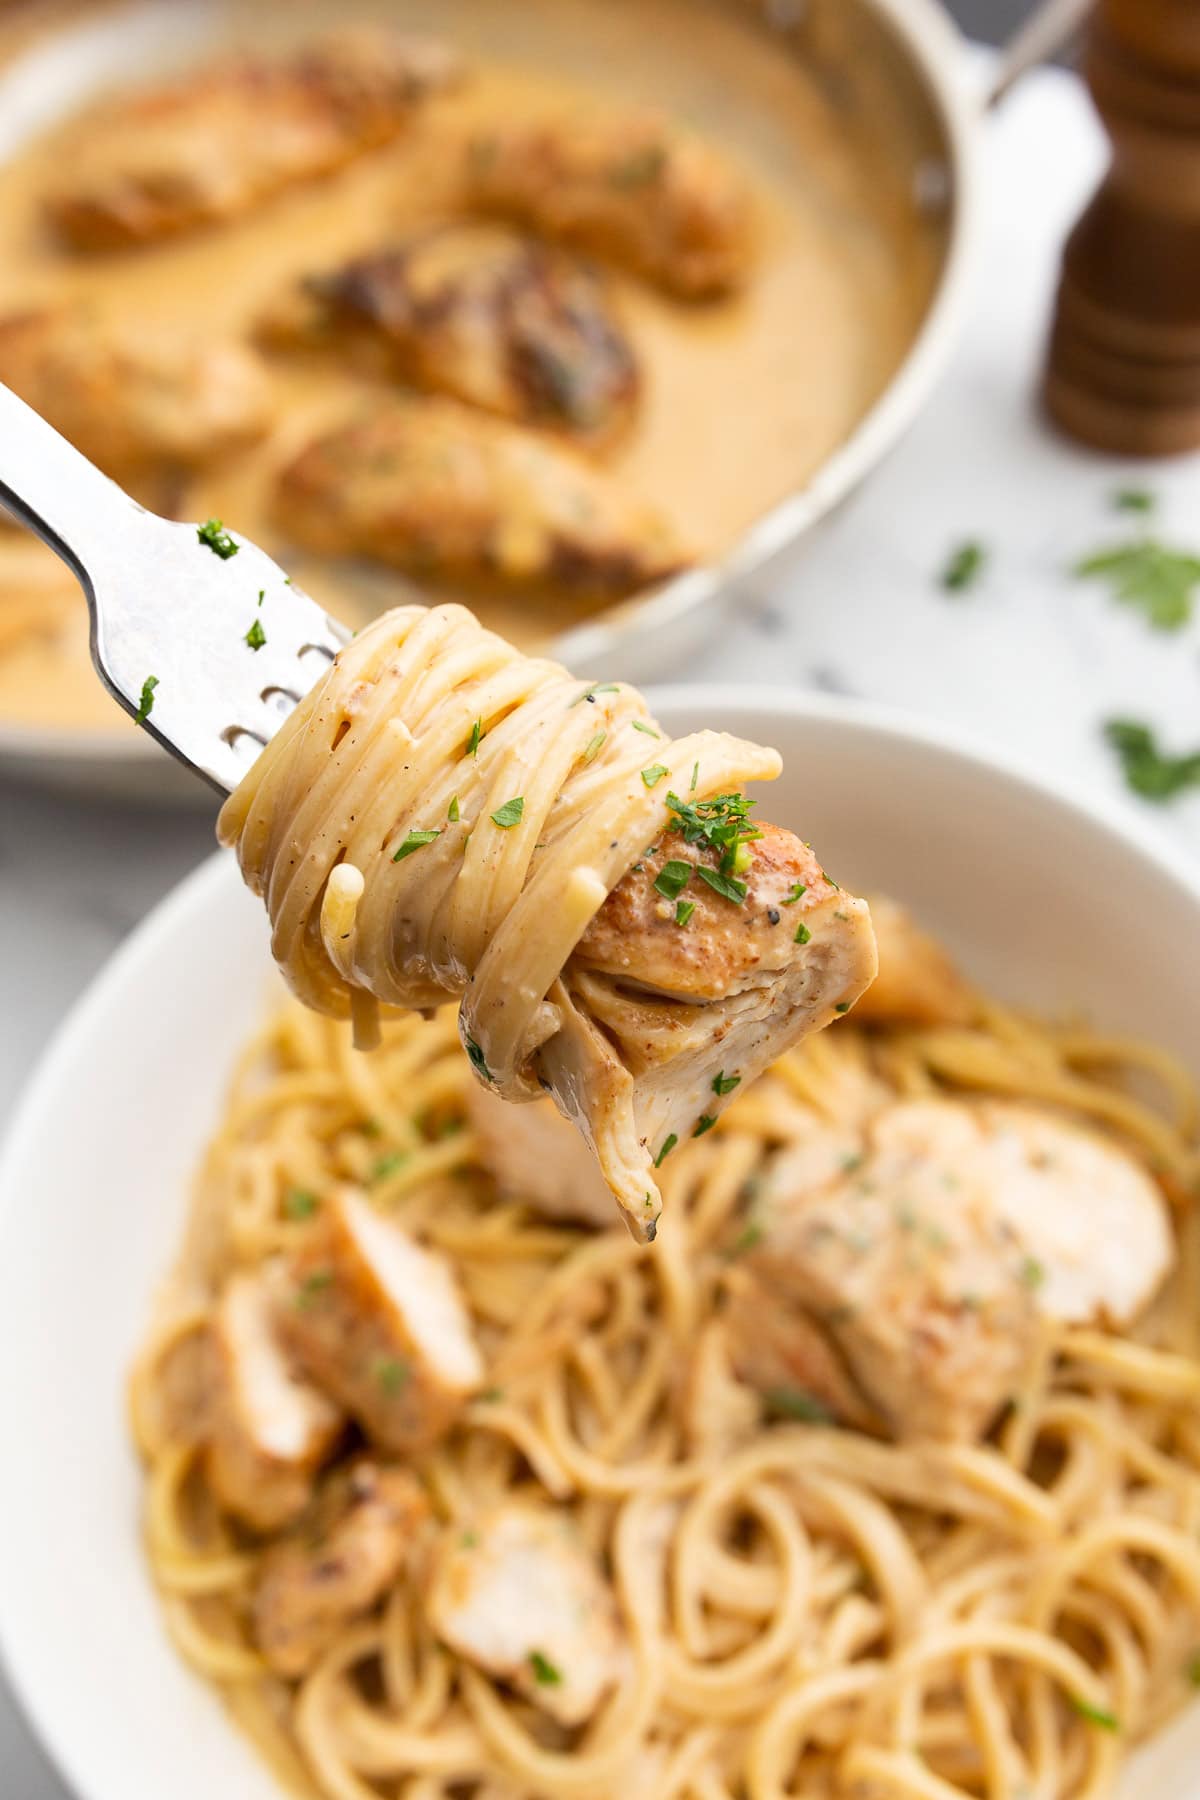 A forkful of creamy spaghetti with a bite-size piece of chicken Lazone.